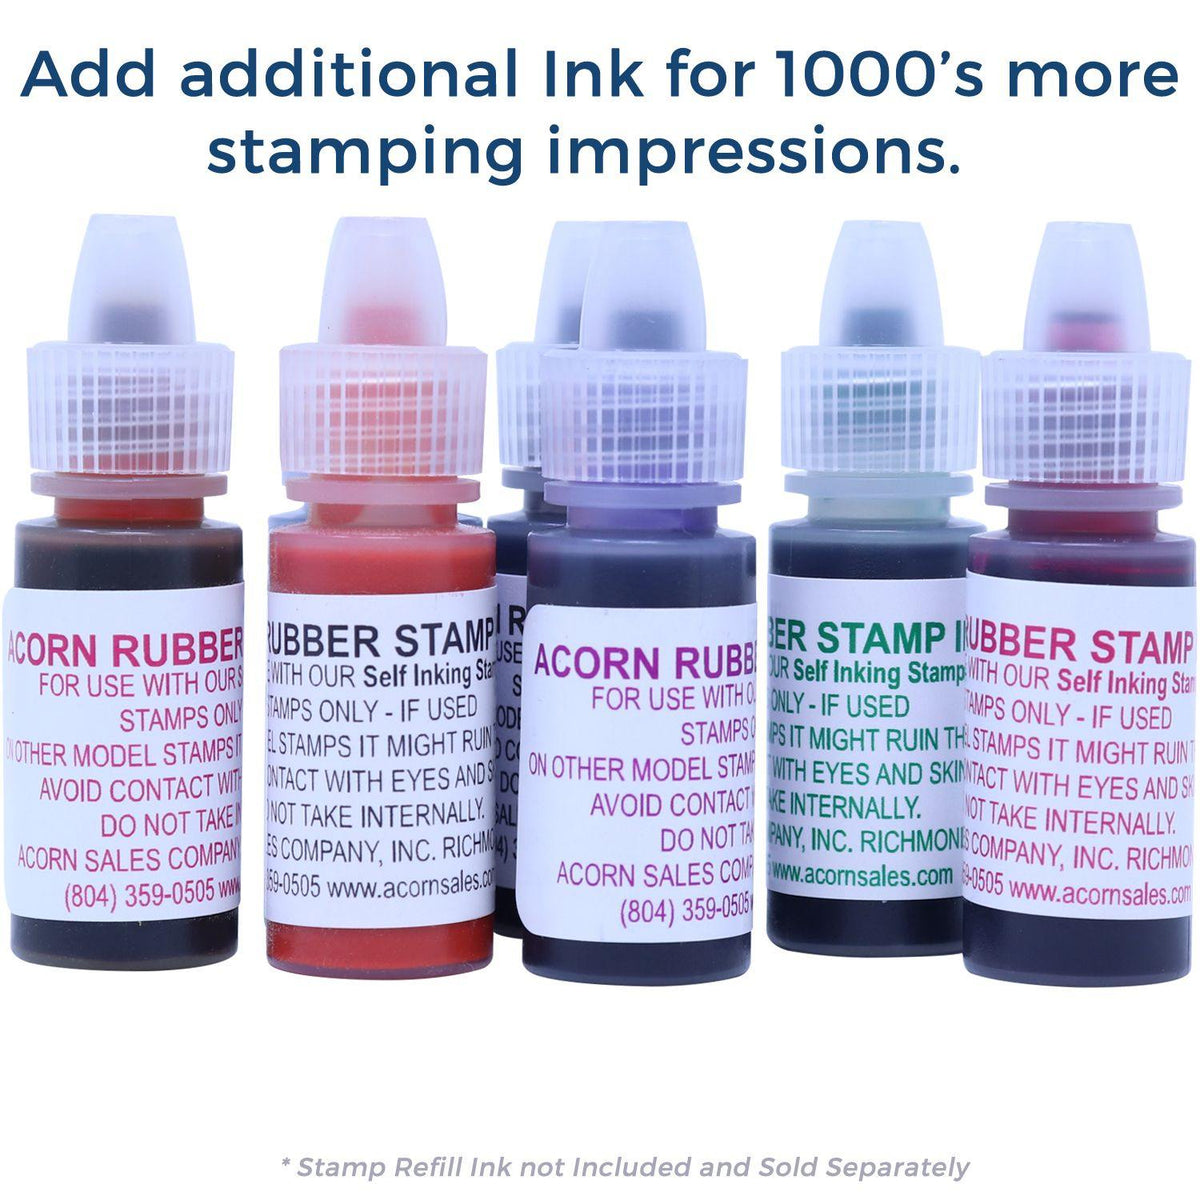 Stamp Refill Ink Available